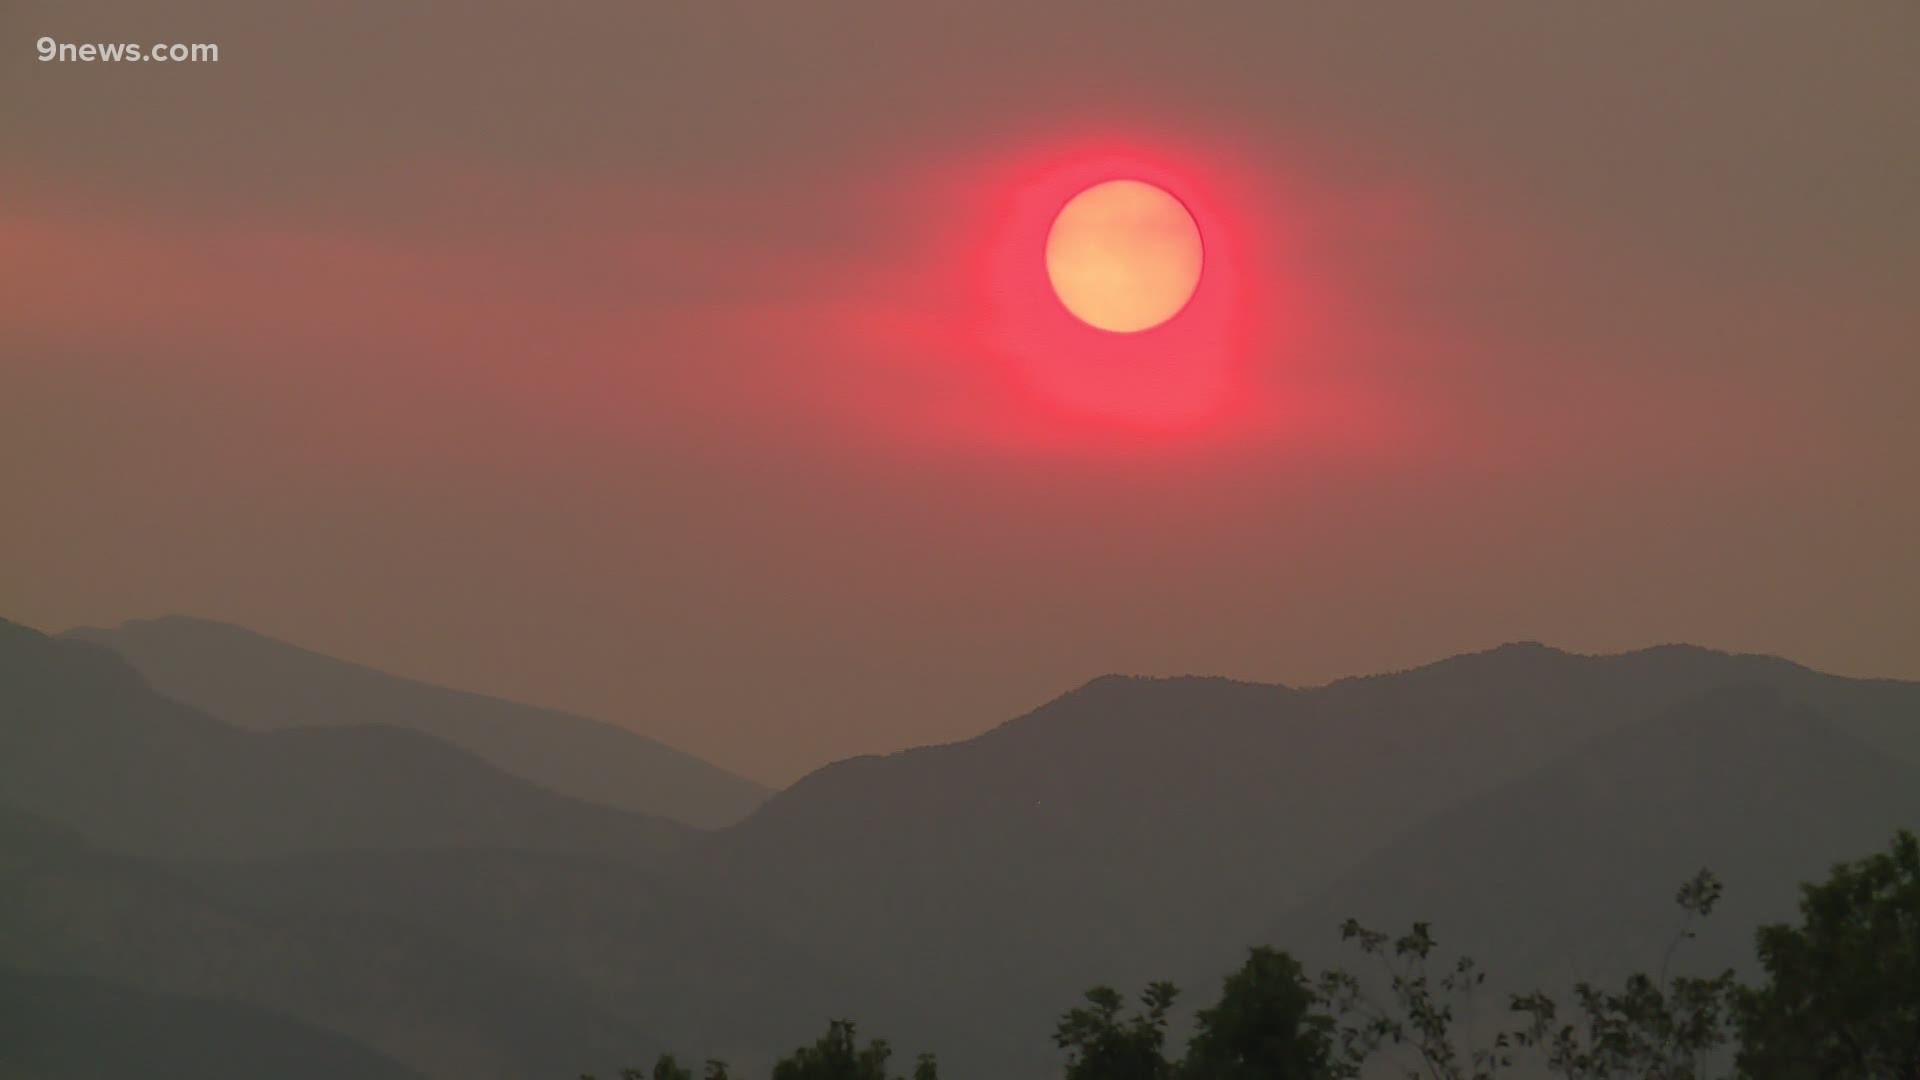 Smoke from several wildfires has been hazing up the Front Range, along with the usual summer ozone.